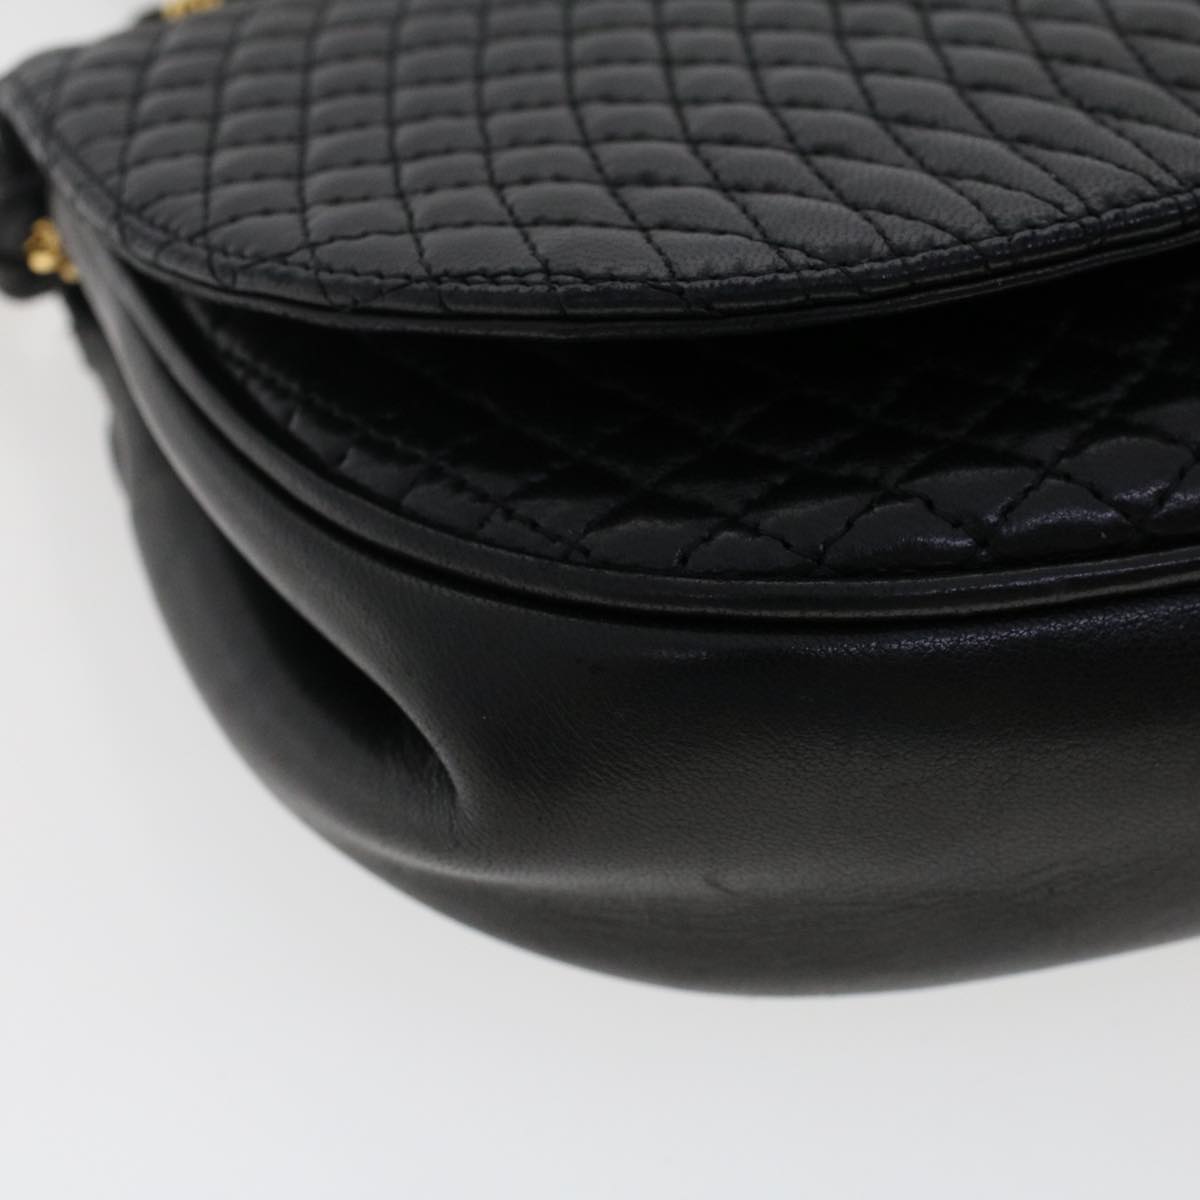 BALLY Quilted Chain Shoulder Bag Leather Black Auth 49777